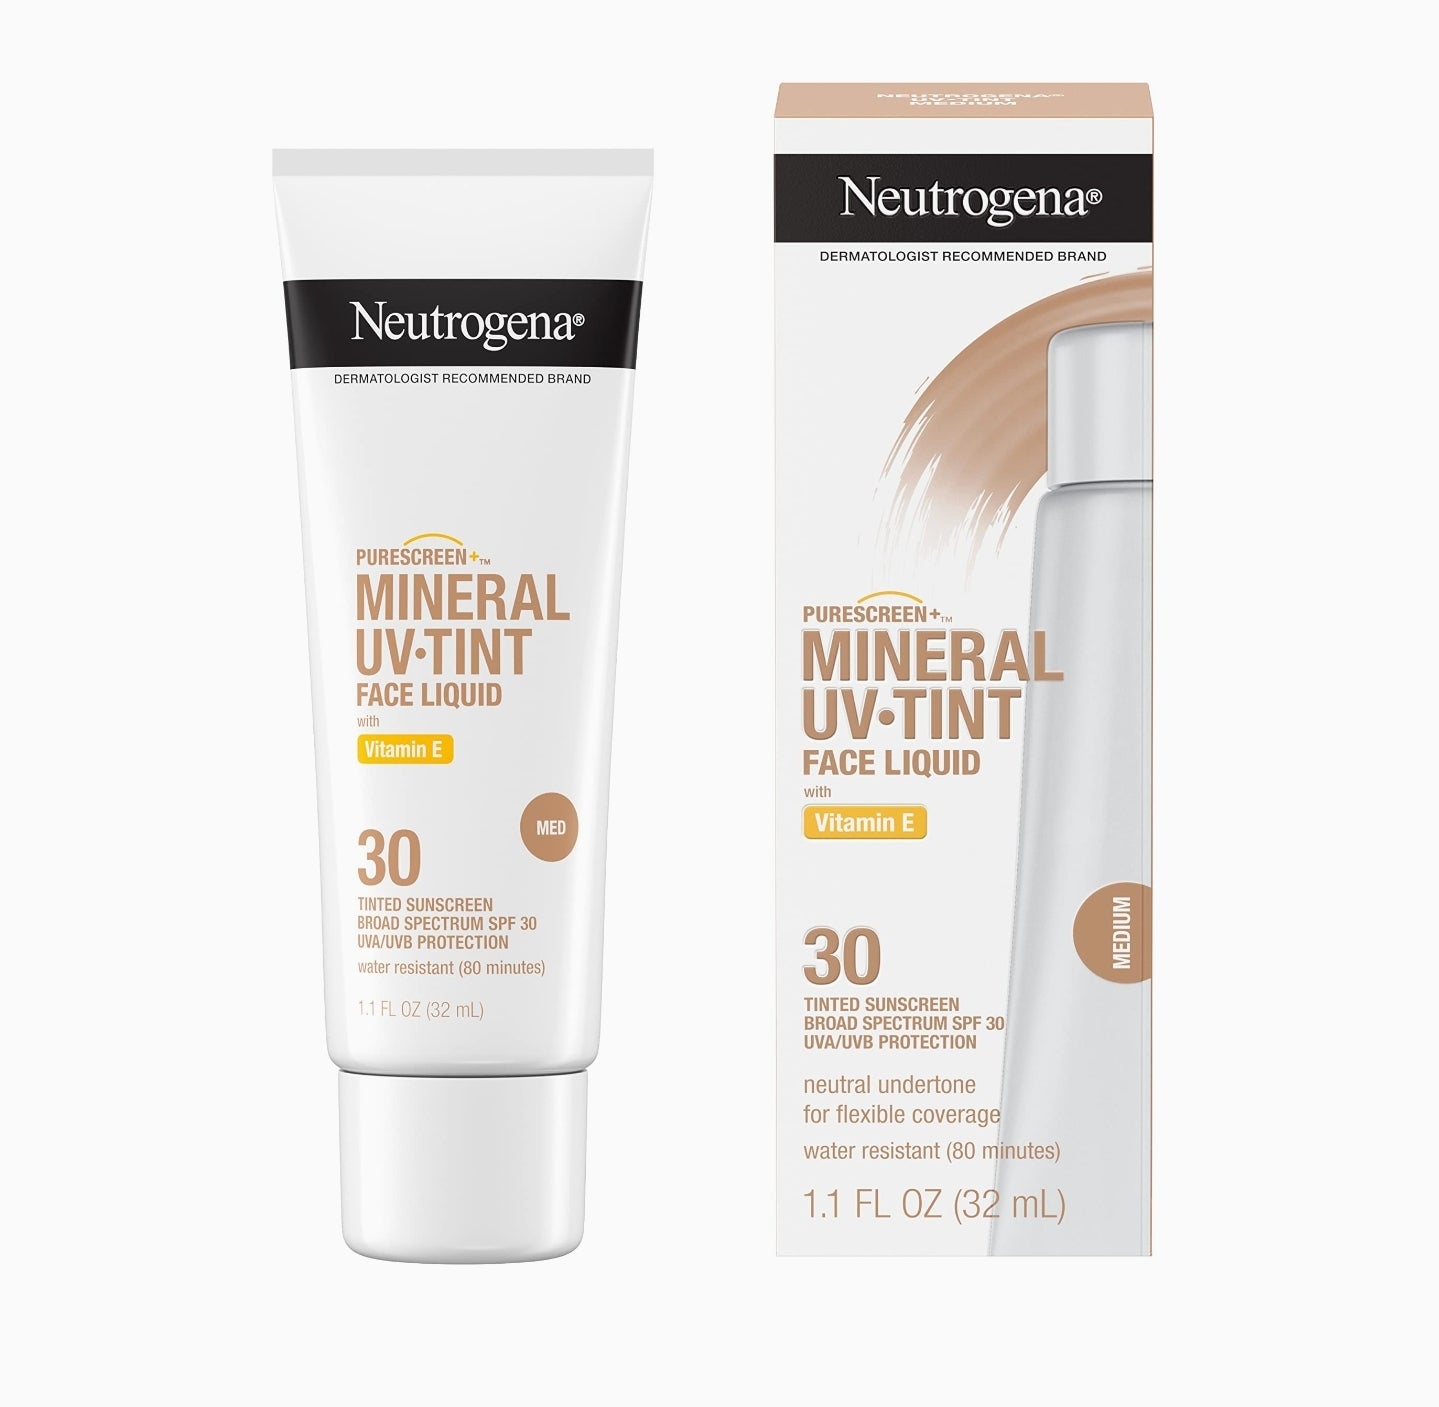 Neutrogena Purescreen+ Tinted Sunscreen for Face with SPF 30, Broad Spectrum Mineral Sunscreen with Zinc Oxide and Vitamin E, Water Resistant, Fragrance Free, , 1.1 fl oz